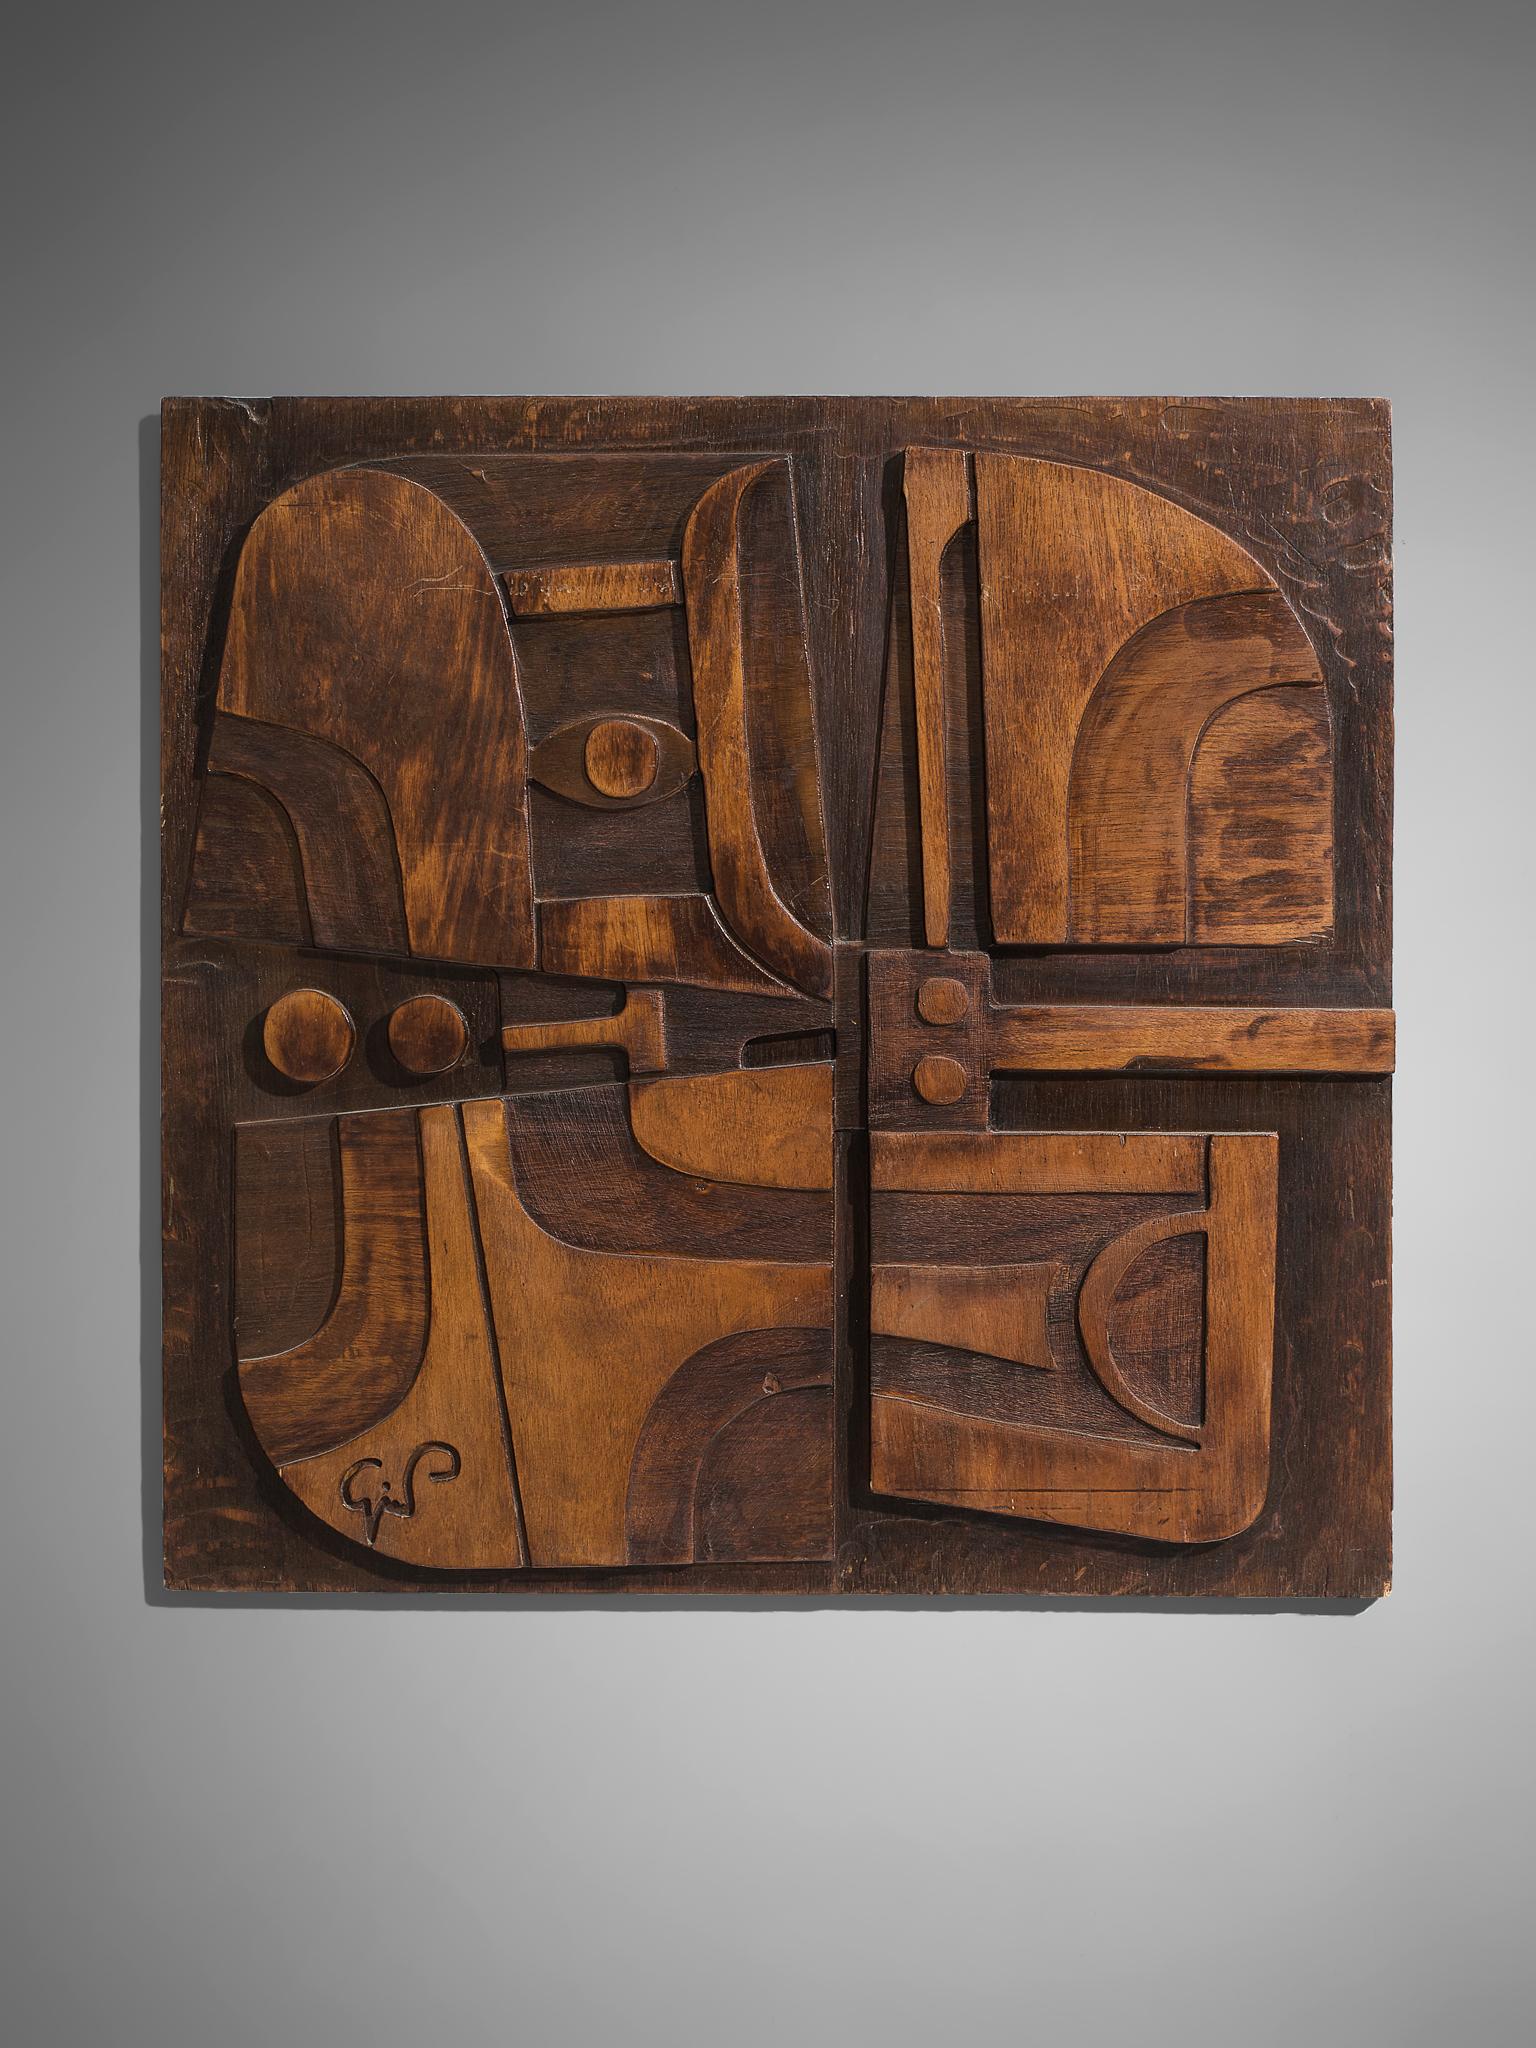 Giancarlo Patuzzi, wall panel, wood, Italy, circa 1970s.

This rare wooden sculptural wall-mounted artwork is designed by Giancarlo Patuzzi. An Abstract Constructivist piece, composed by carved, geometric wooden forms. During his career, Patuzzi